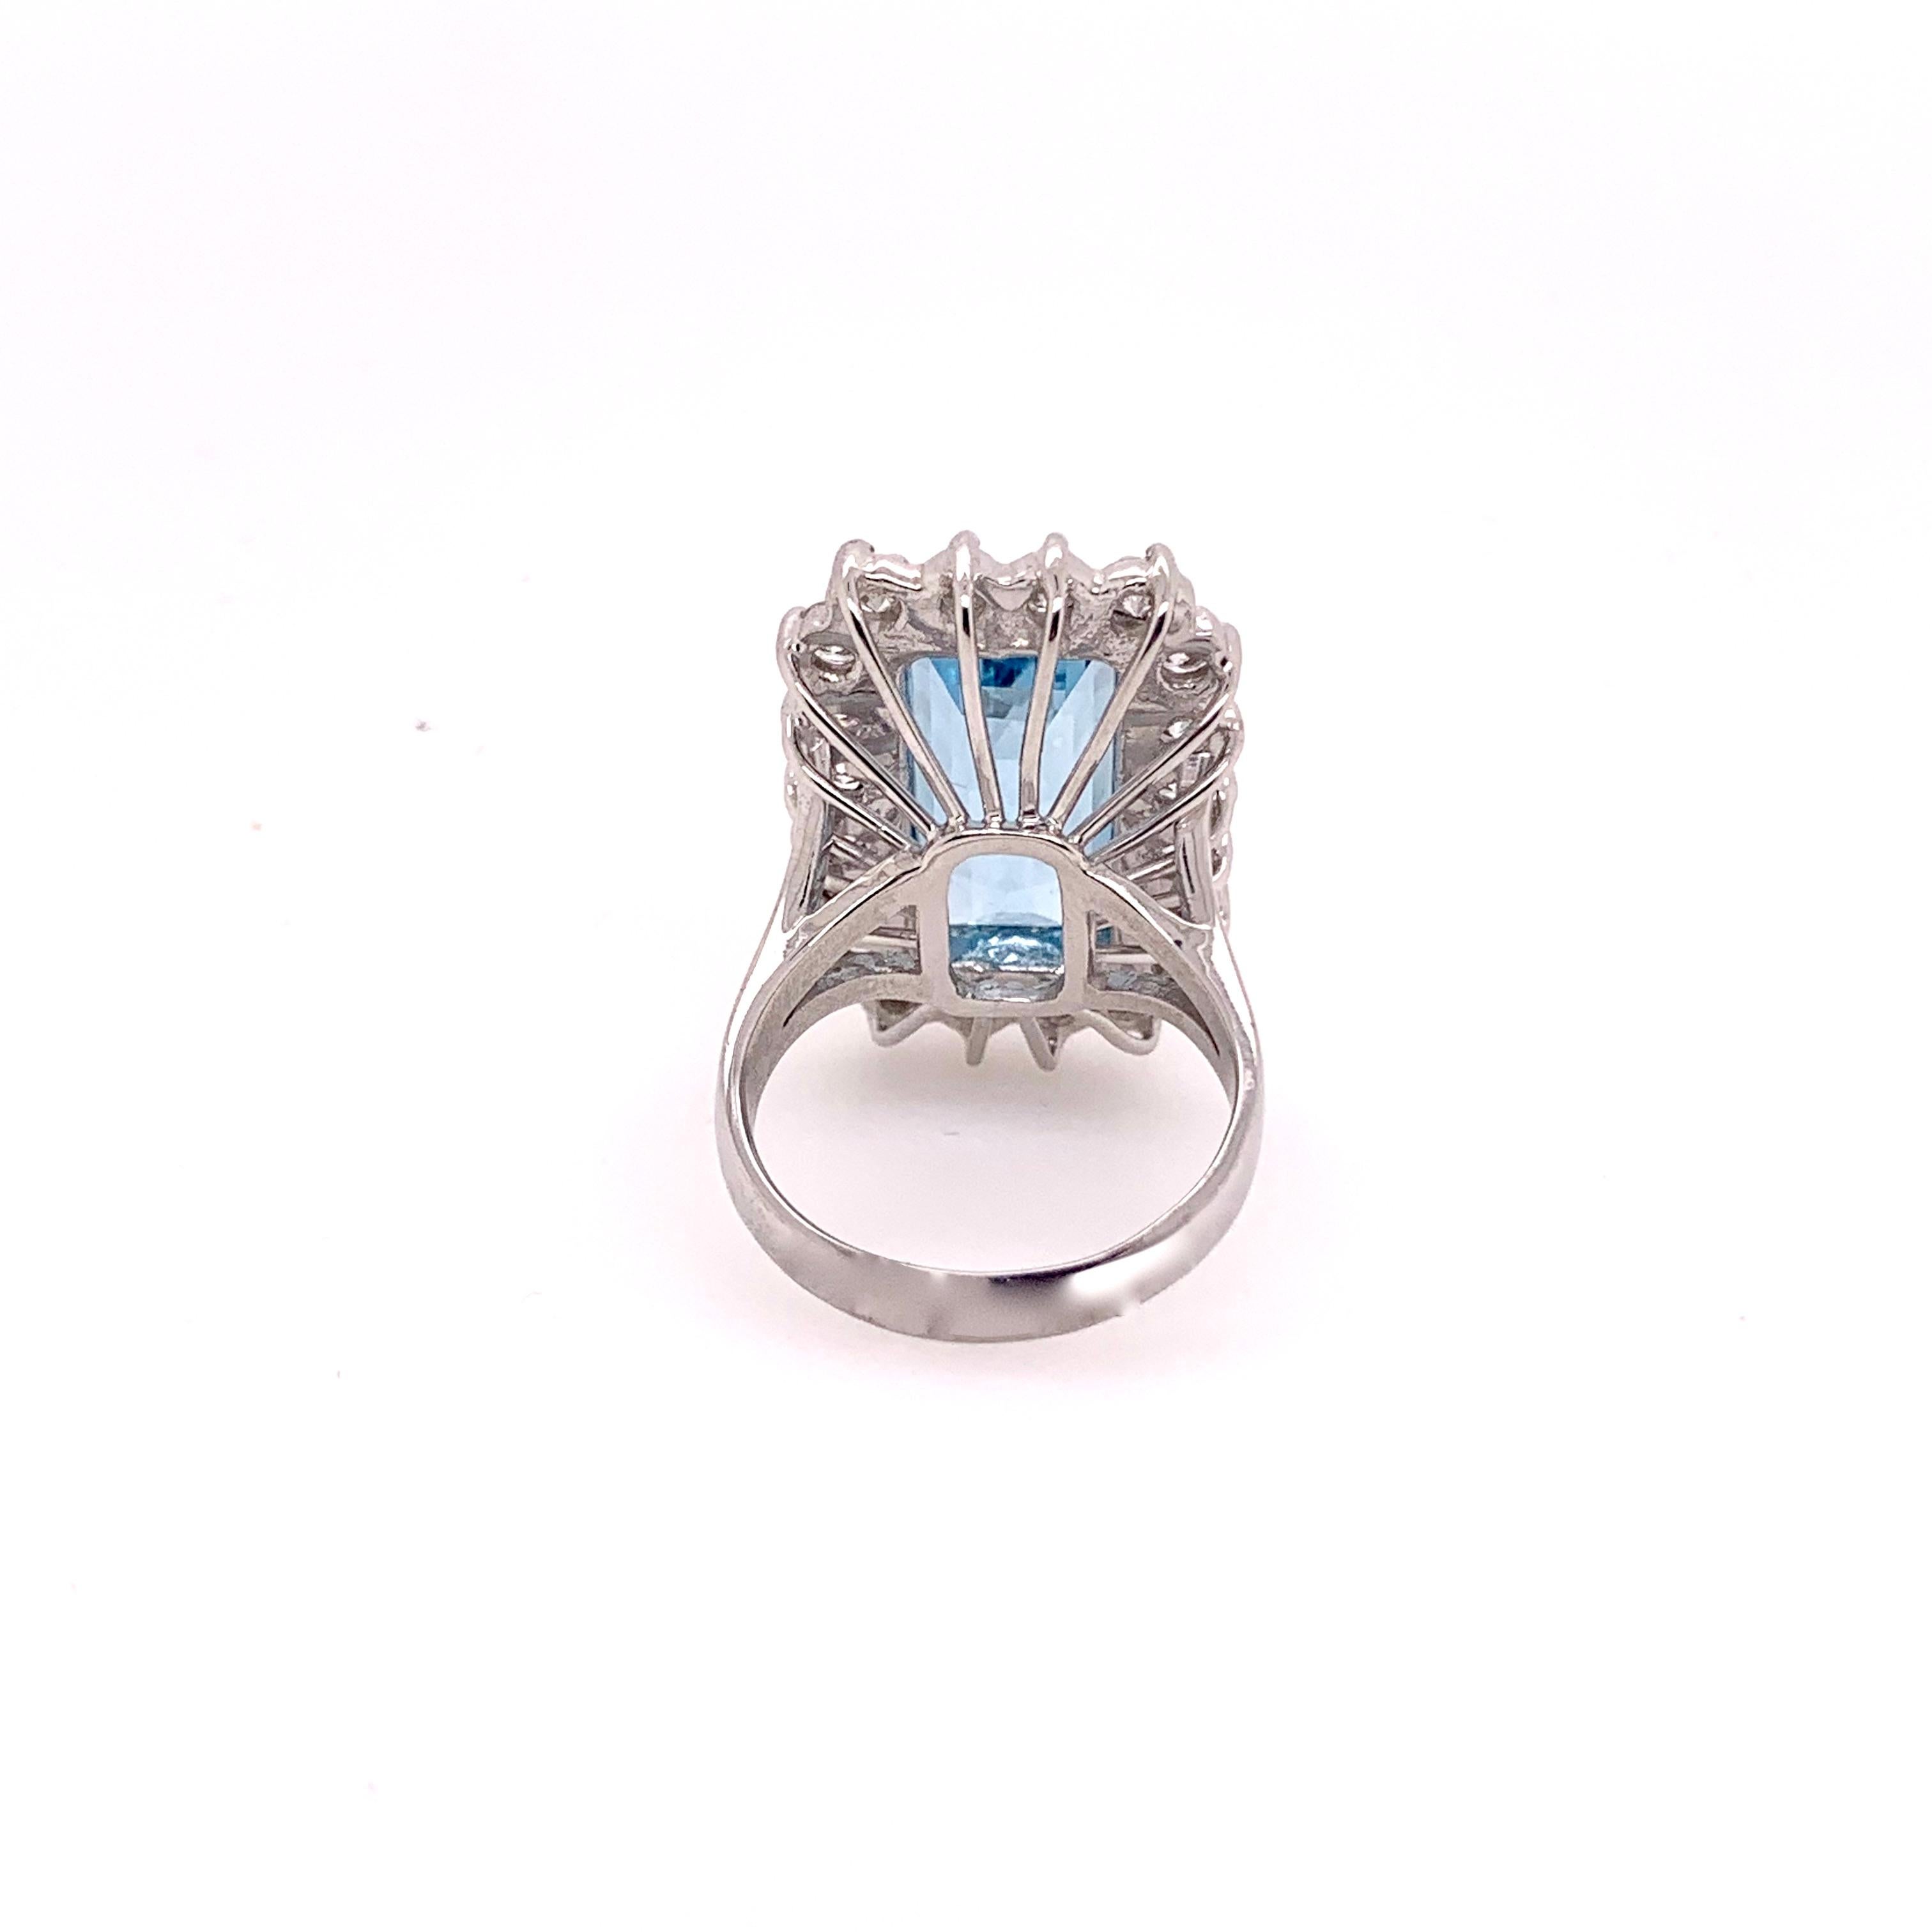 This gorgeous elongated emerald cut aquamarine is set in a classic 14k white gold setting.  The strong blue hue of the 8.93 carat aquamarine is accompanied by 2.03 carats of round brilliant diamonds in a classic prong setting.   This March